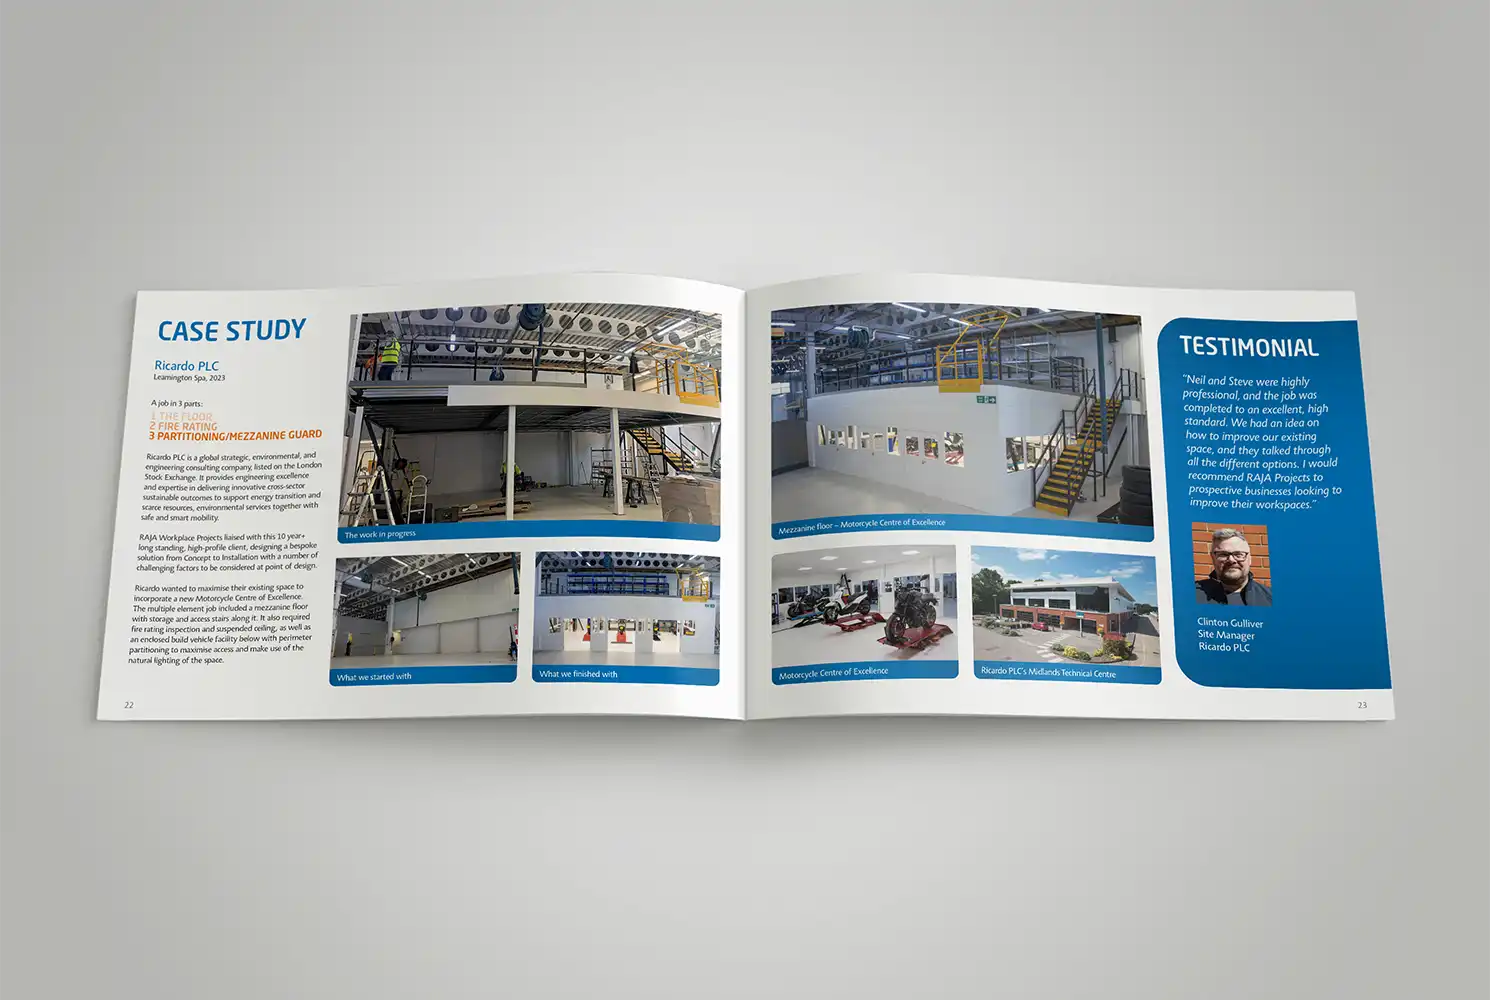 Mockup of RAJA RWP brochure showing a double page spread design